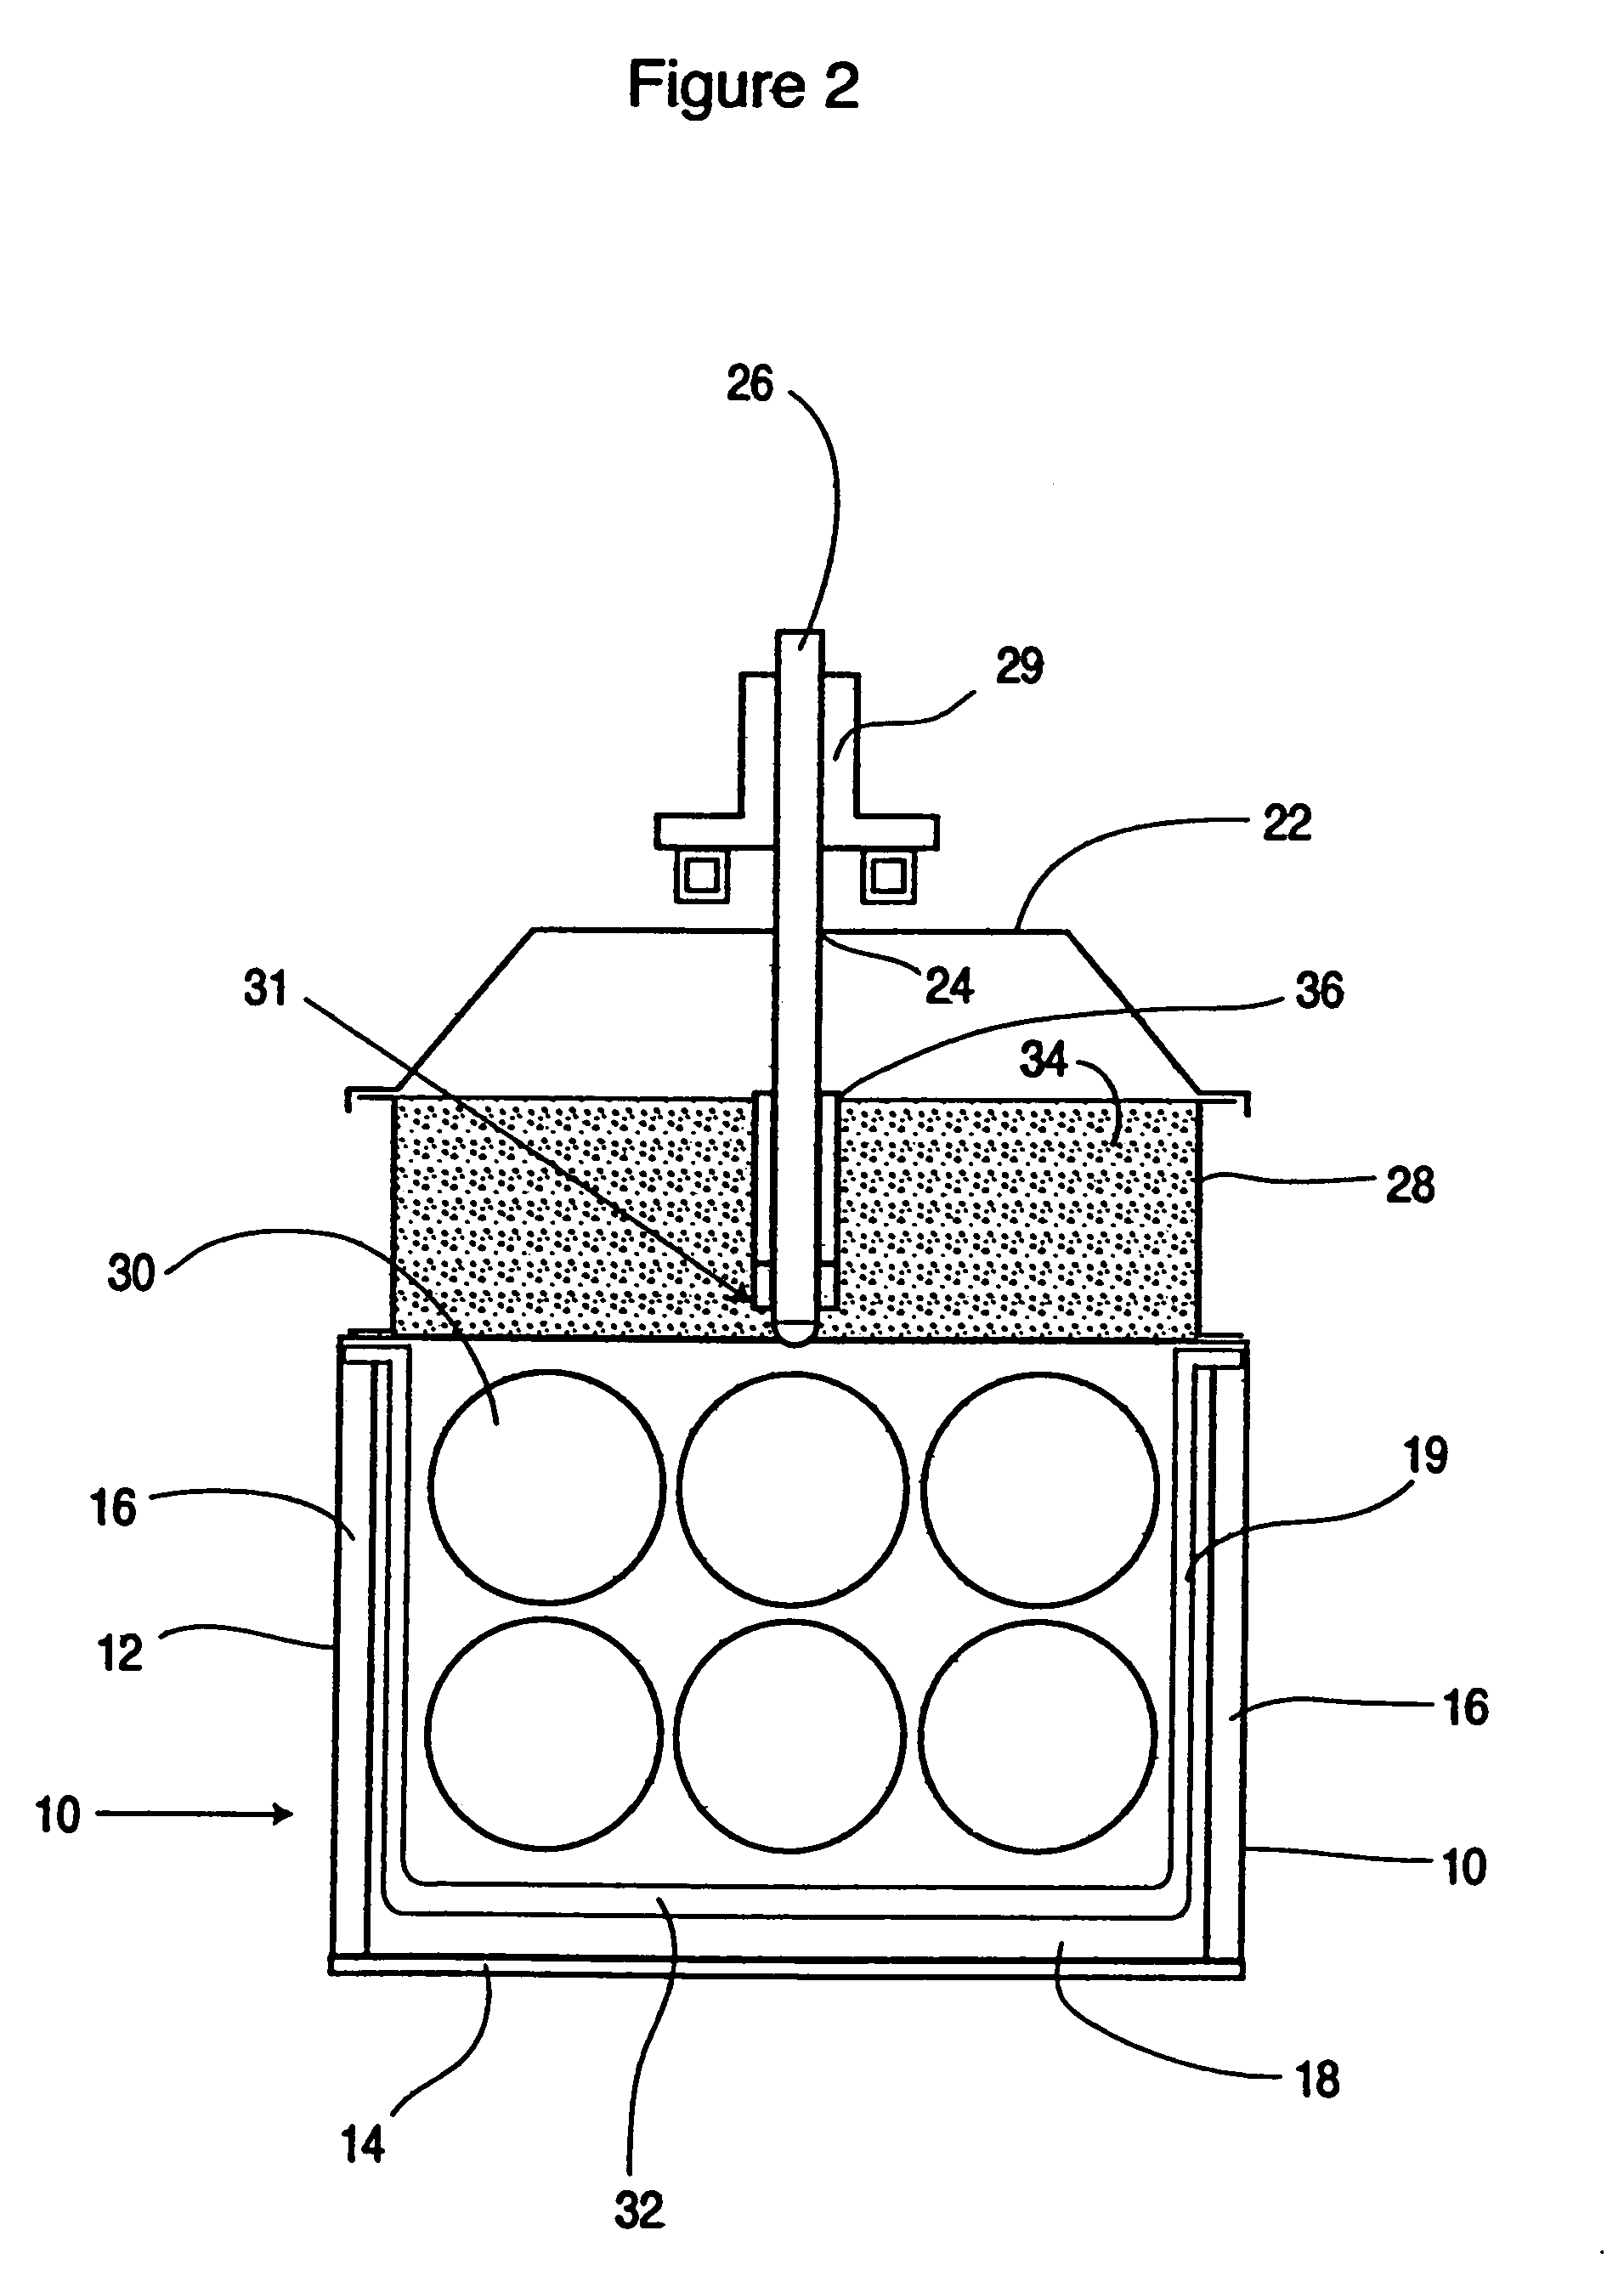 Methods for melting of materials to be treated